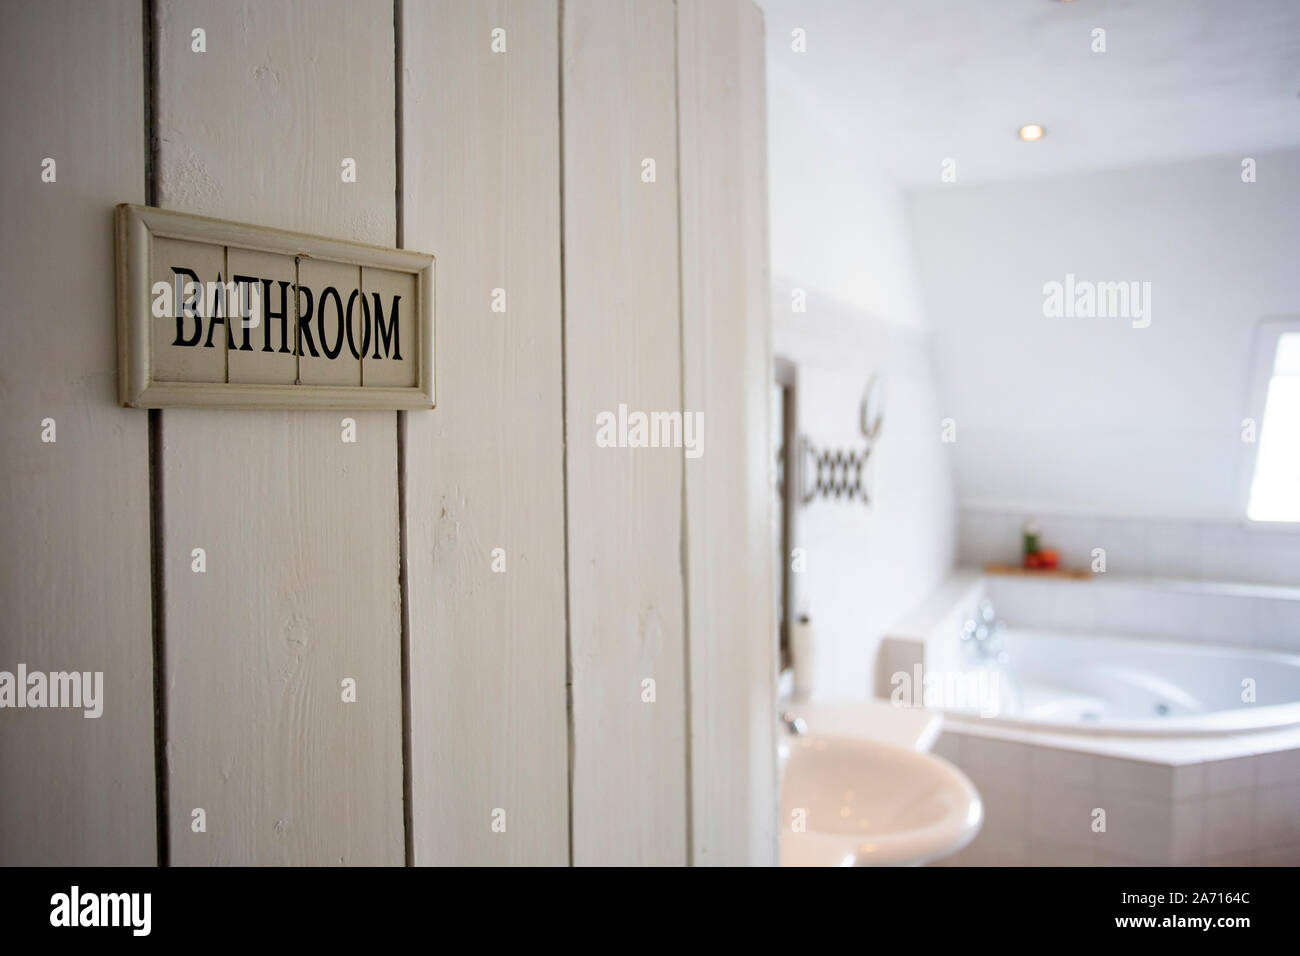 Closeup bathroom door with sign bathroom shallow depth of field, blurred background, white colors Stock Photo